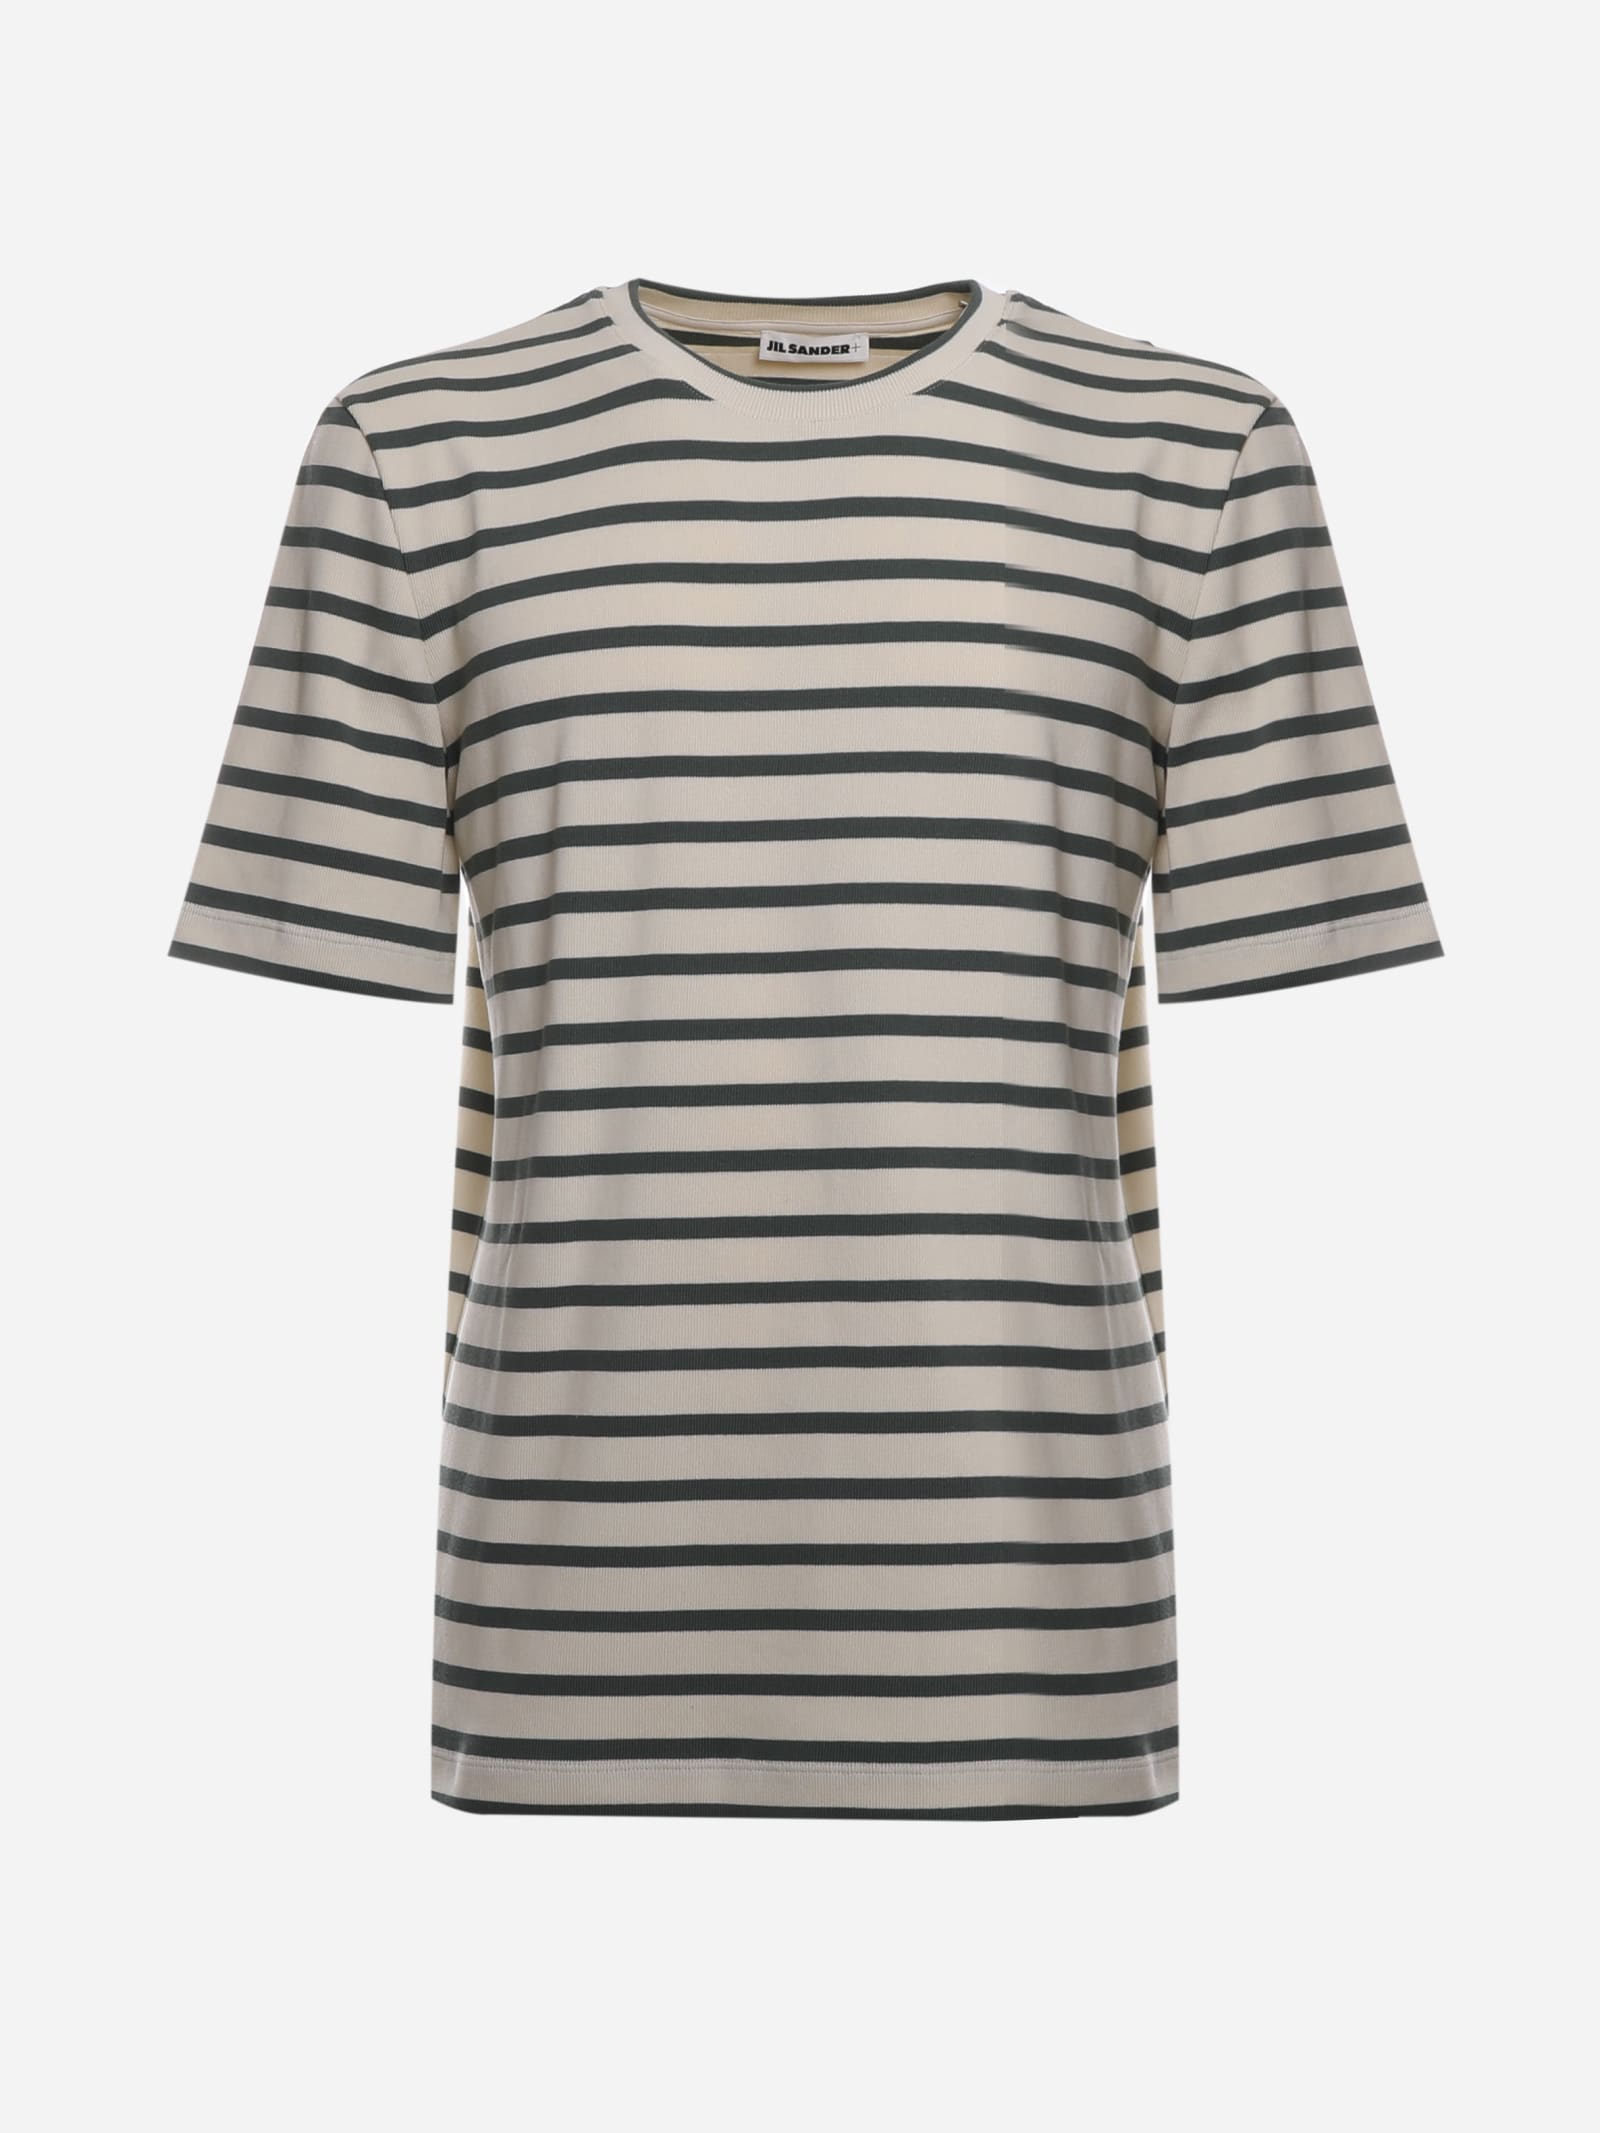 Jil Sander T-shirts COTTON T-SHIRT WITH ALL-OVER STRIPED PATTERN